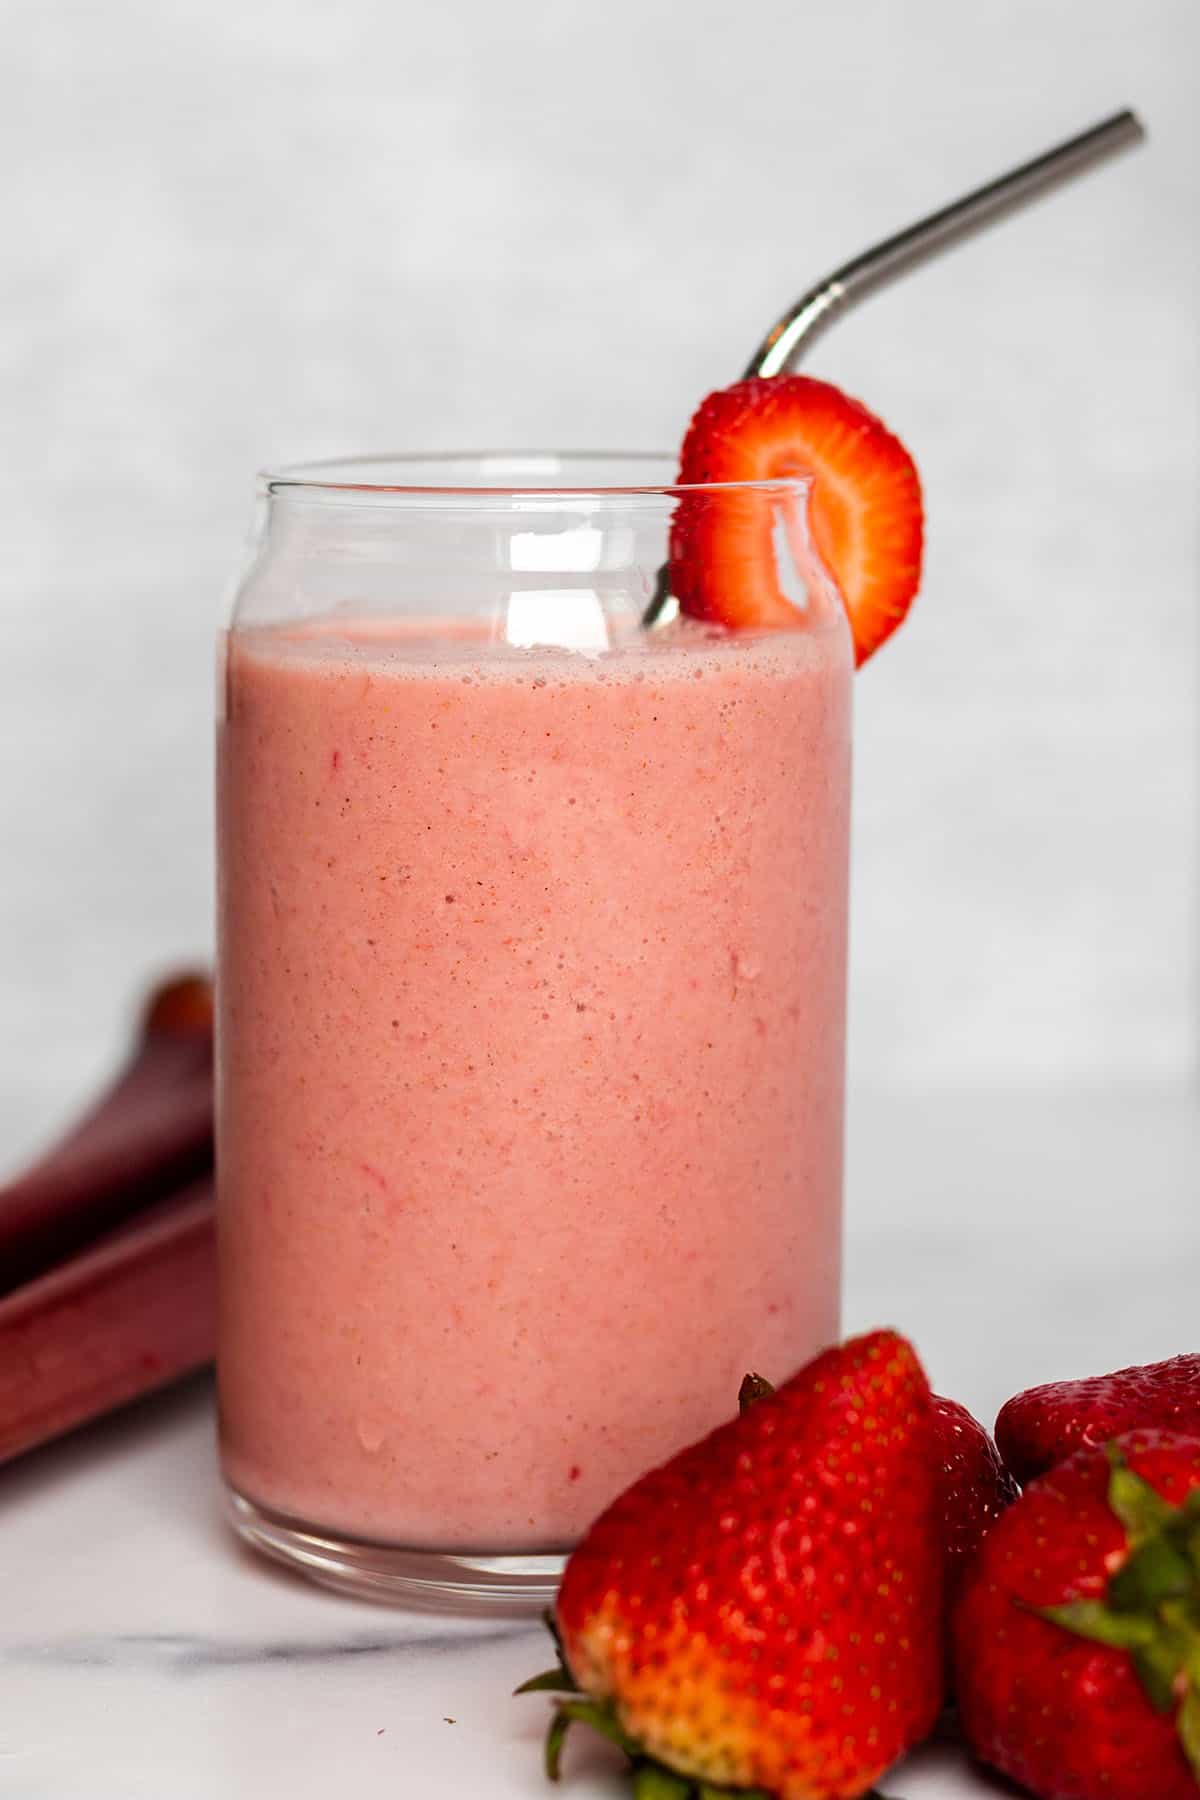 A glass with a smoothie and piles of fresh strawberries and rhubarb stalks.